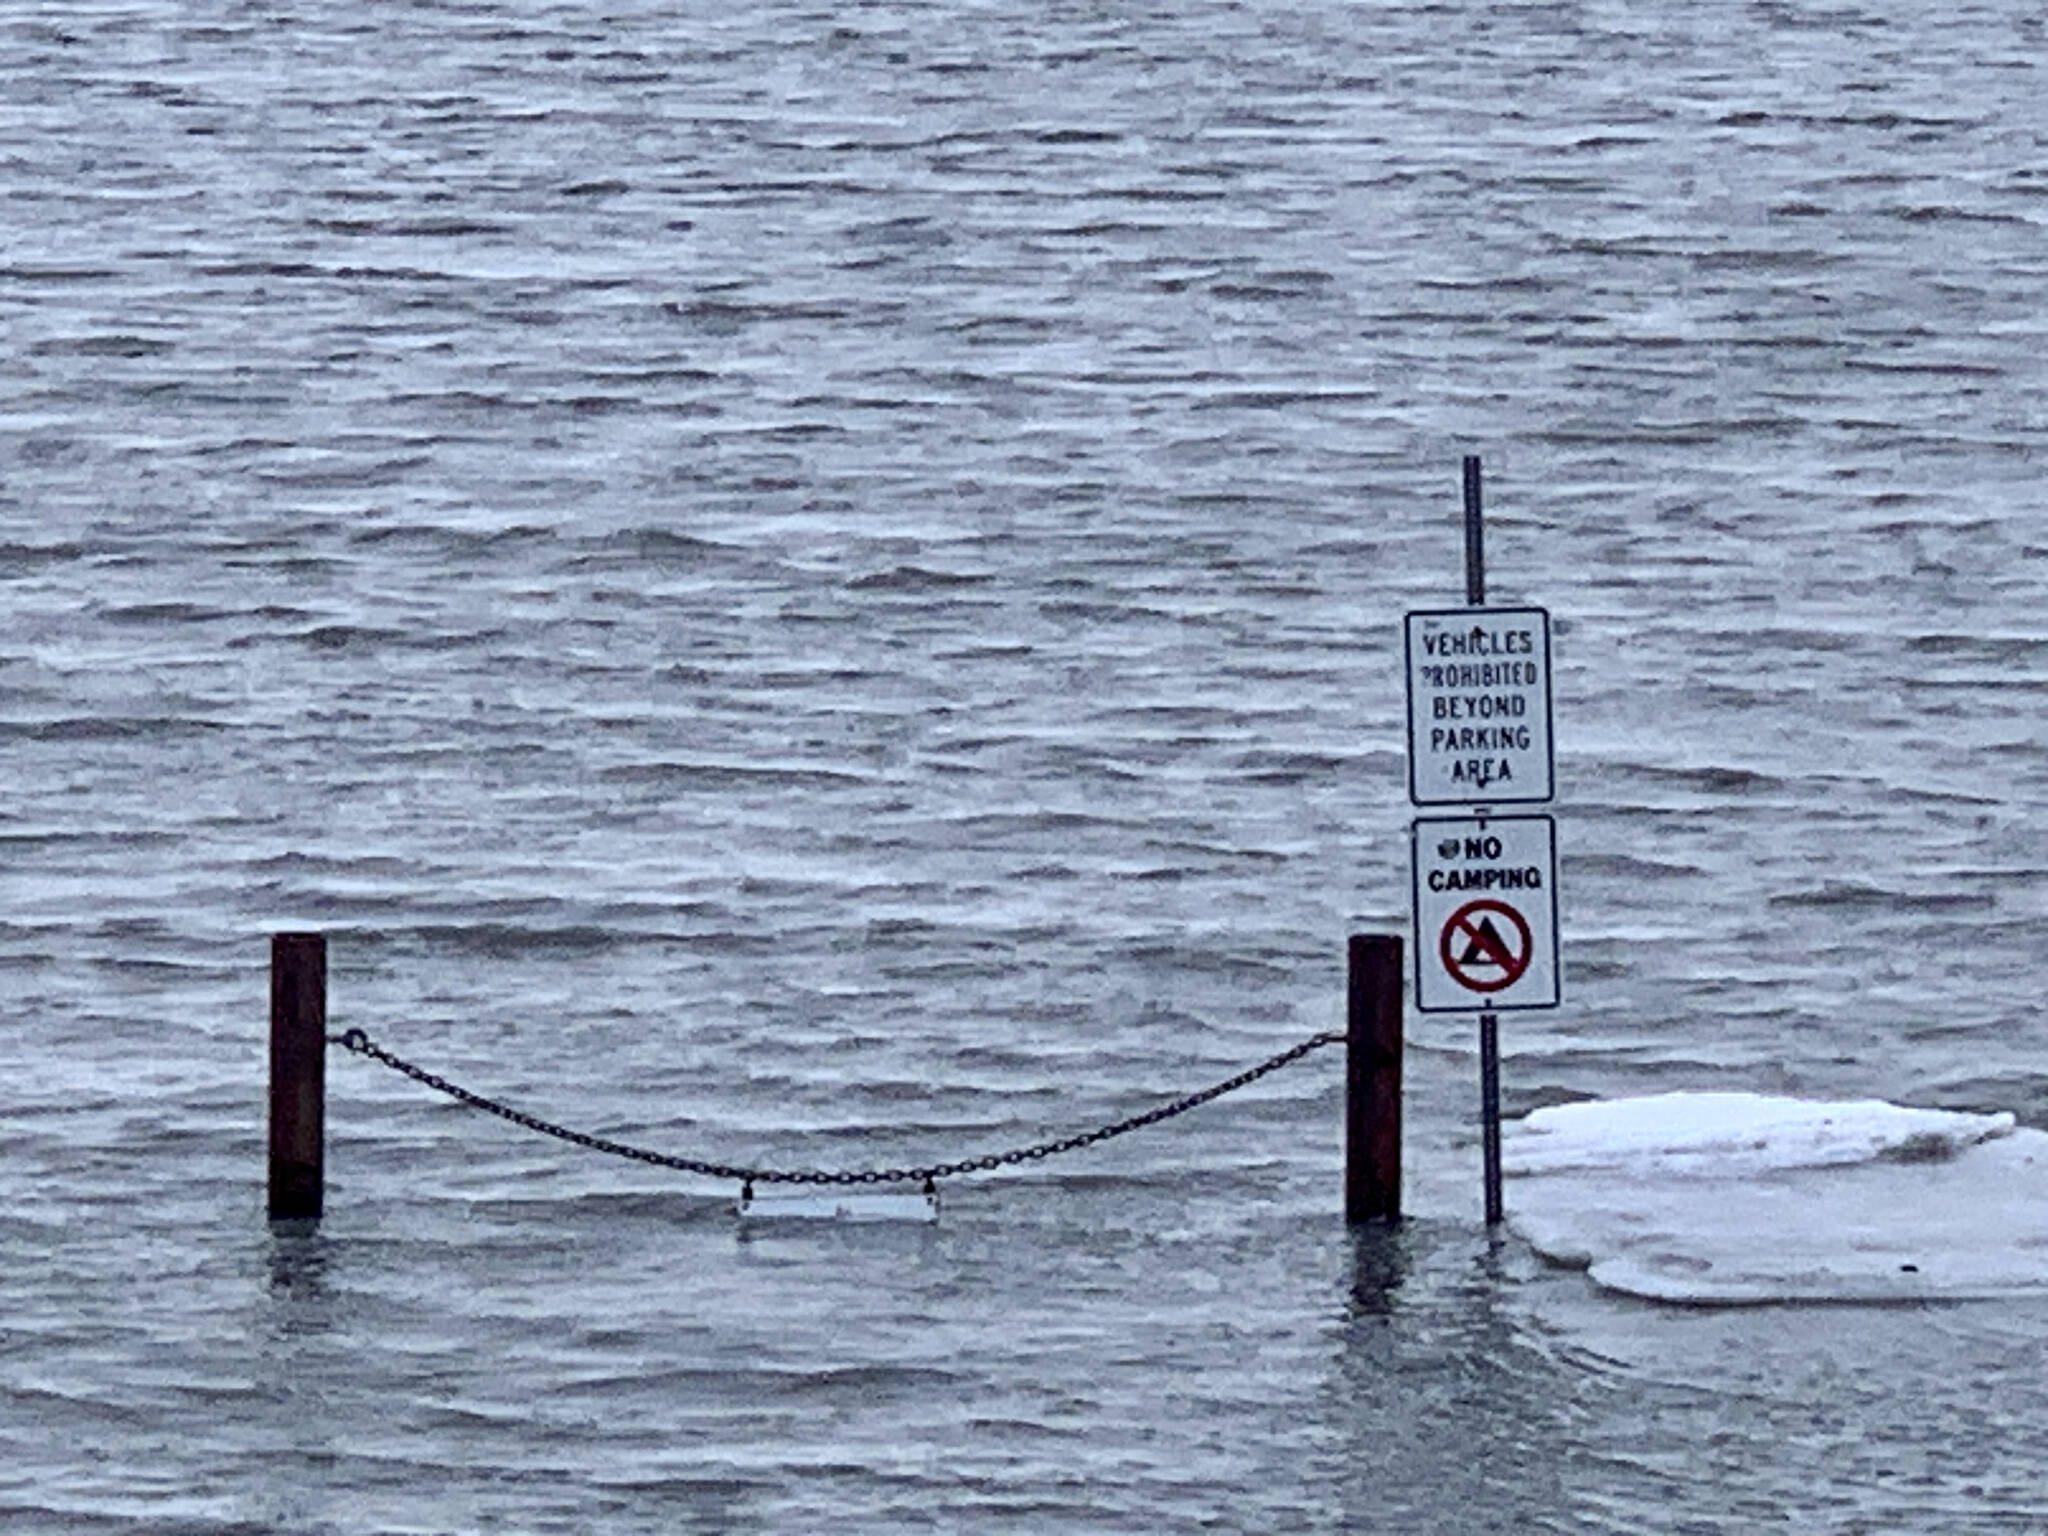 High tide washes into a parking area along the Homer Spit Road, Jan. 22, 2023, in Homer, Alaska. (Photo by Christina Whiting)